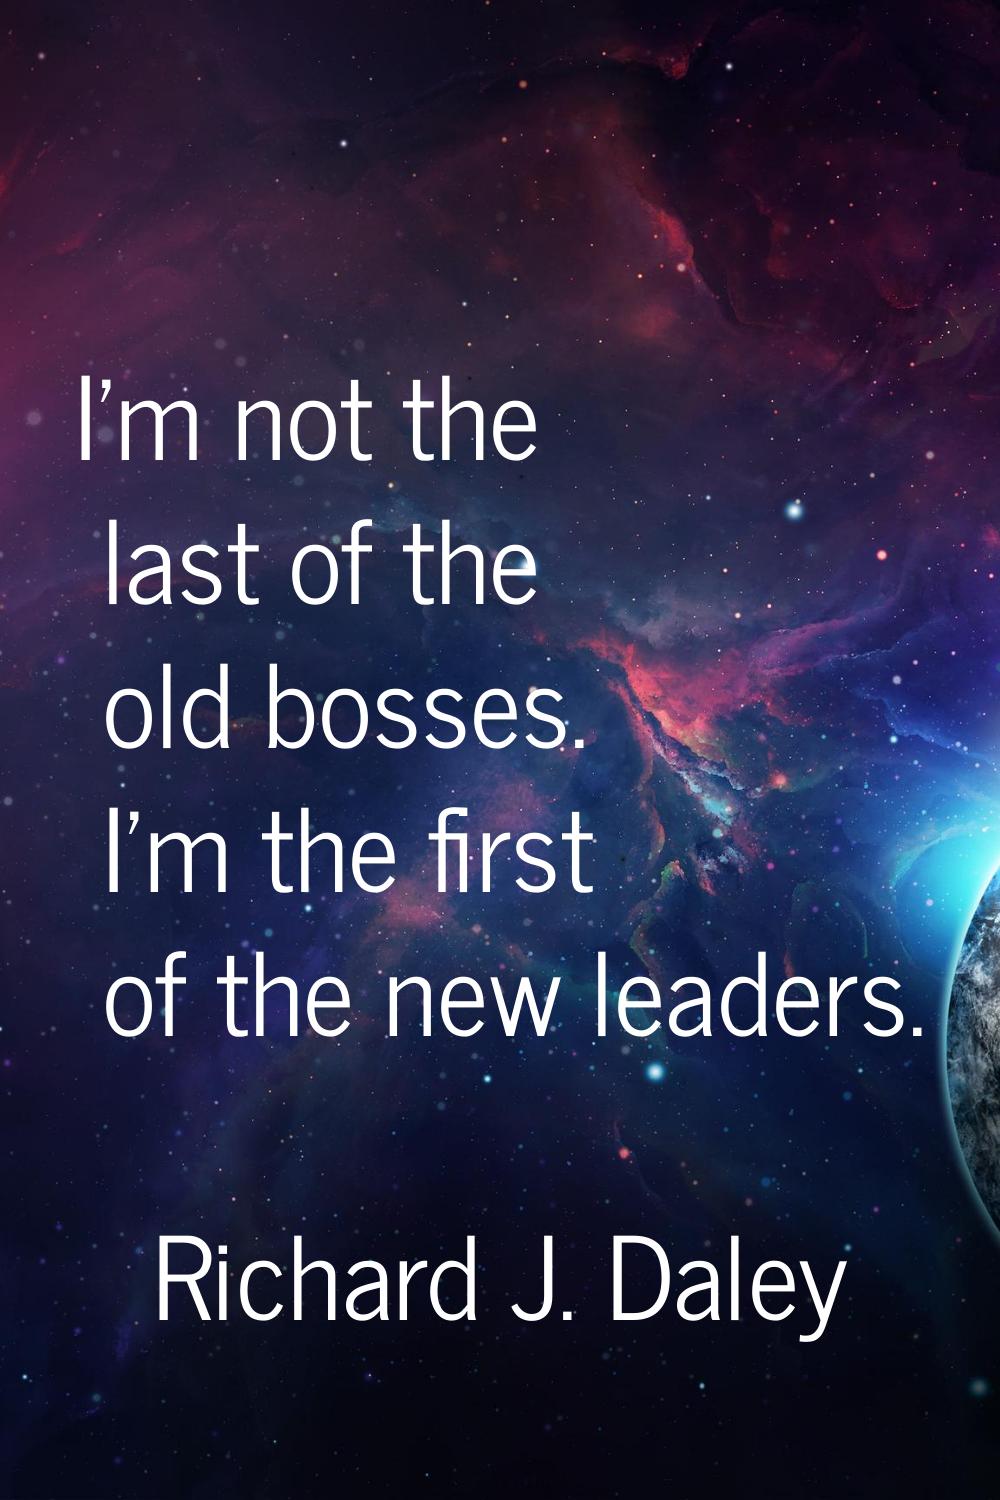 I'm not the last of the old bosses. I'm the first of the new leaders.